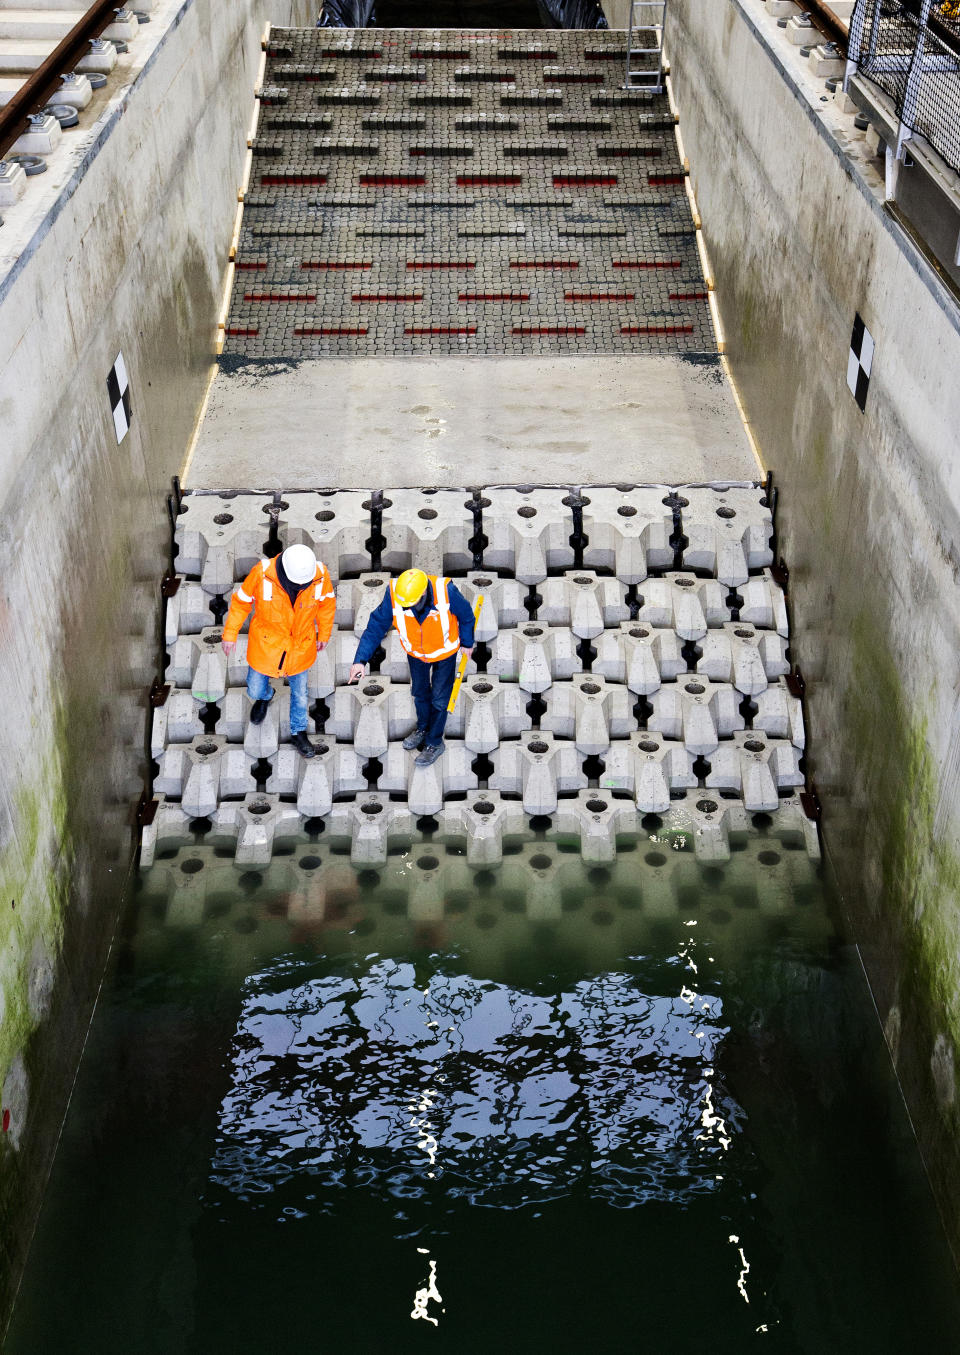 This photo taken in Jan. 2019 and made available by Deltares shows the flume wave tank in Delft, Netherlands, that is used to test structure designs for the strengthening work for the Afsluitdijk. With climate change bringing bigger storms and rising sea levels, one of the low-lying Netherlands’ key defenses against the sea is getting a major makeover. The 5-year project will see workers lay thousands of concrete blocks and raise parts of the 87-year-old Afsluititdijk dike. (Guus Schoonewille/Deltares via AP)